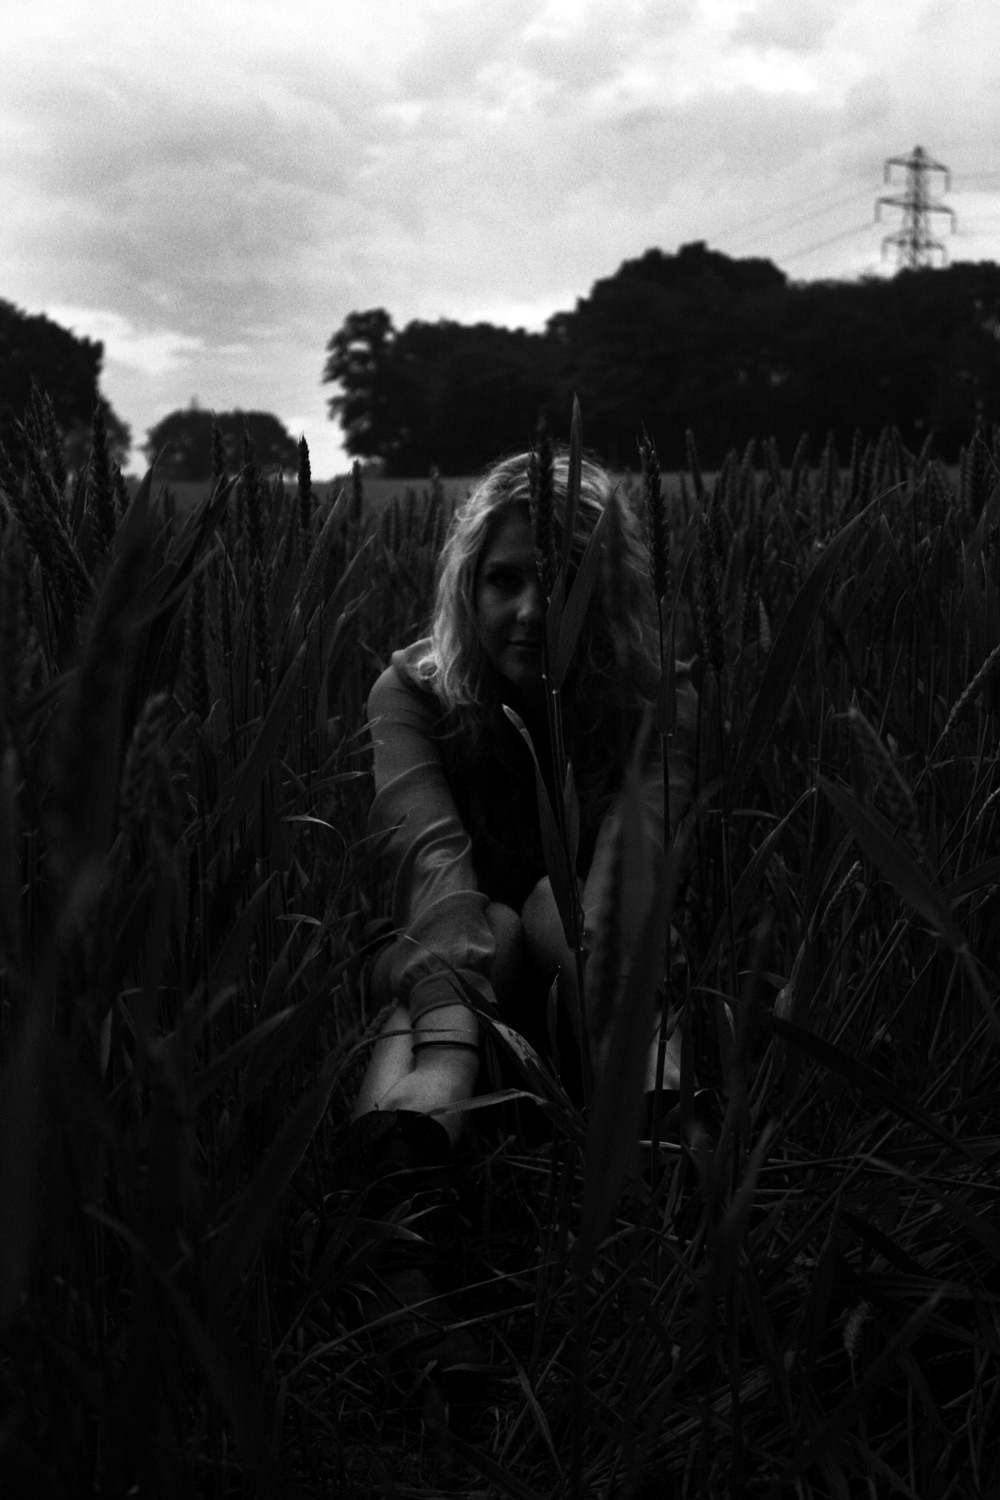 Sangiev sriskumar Charlotte smith swagger muffin Swagger muffin photograph river chess rickmansworth loudwater Canon eos 450D Lookbook MORNING shoot light of firefly naruto soundtrack